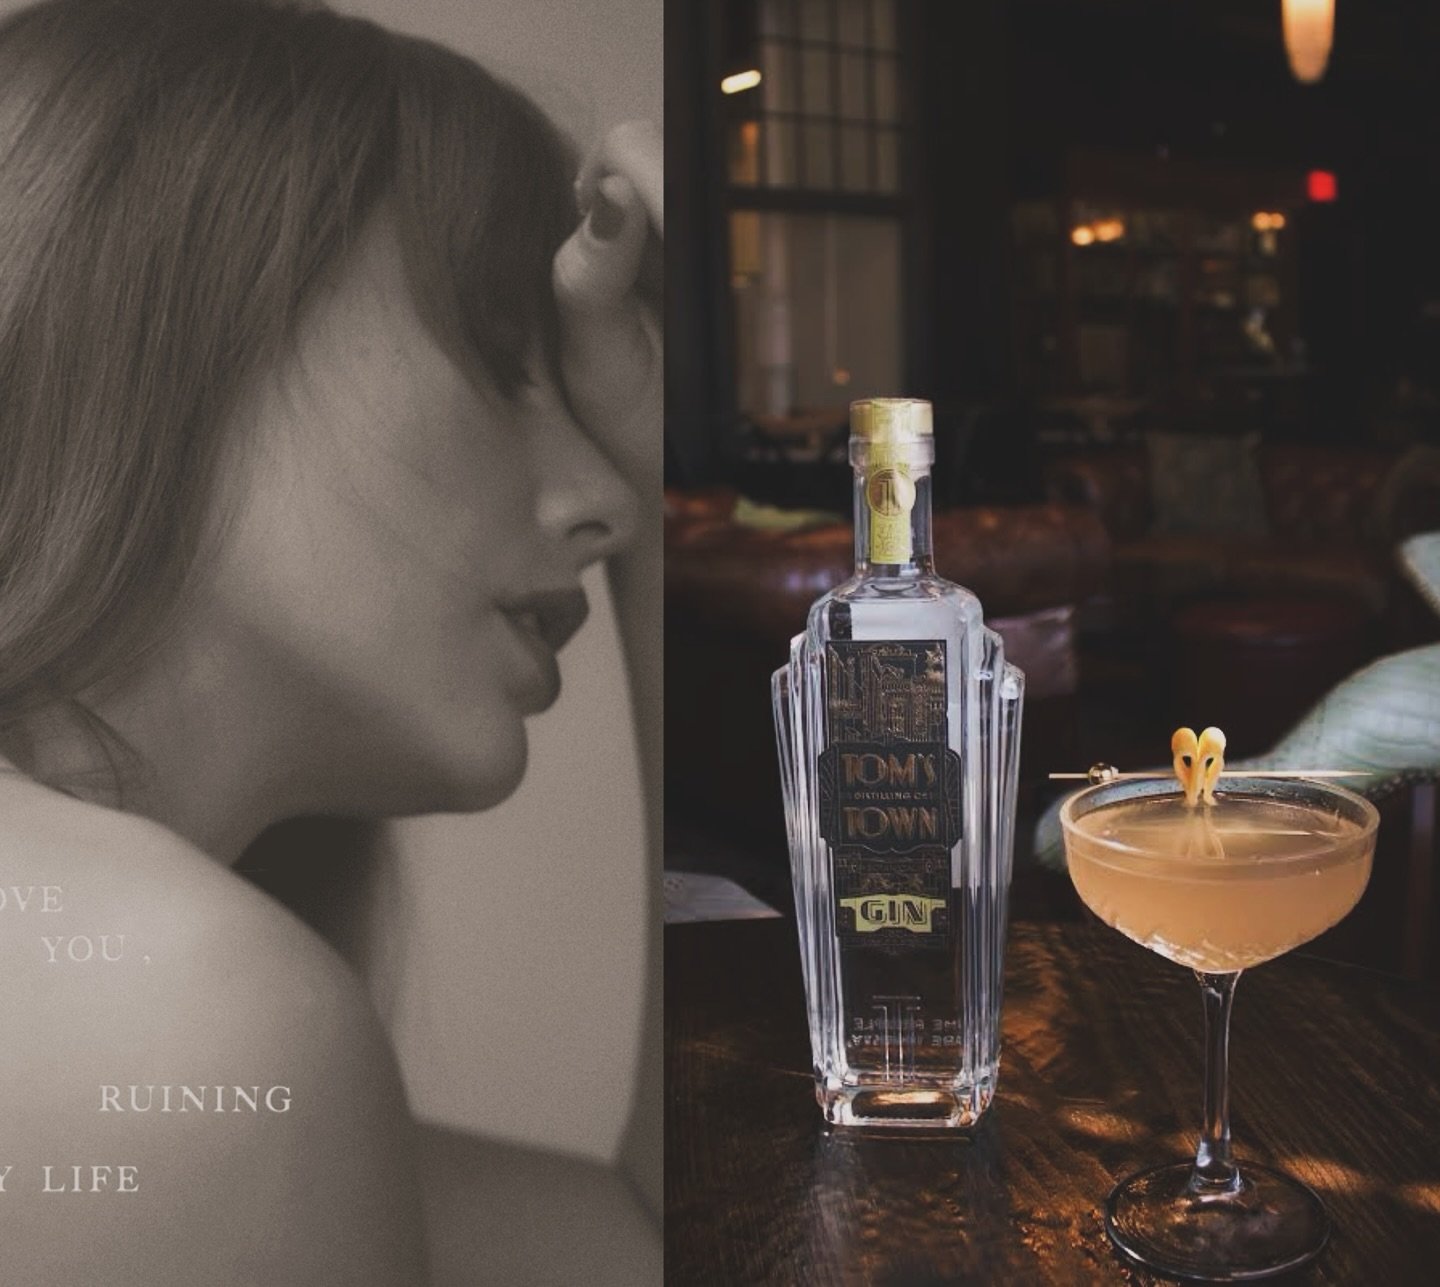 🌟 Are you ready for it? Celebrate Taylor Swift&rsquo;s &lsquo;The Tortured Poets Department&rsquo; with her drink of choice&mdash;the French Blonde, crafted with Tom&rsquo;s Town Botanical Gin! 🍸 Toast to another hit album as the clock strikes midn